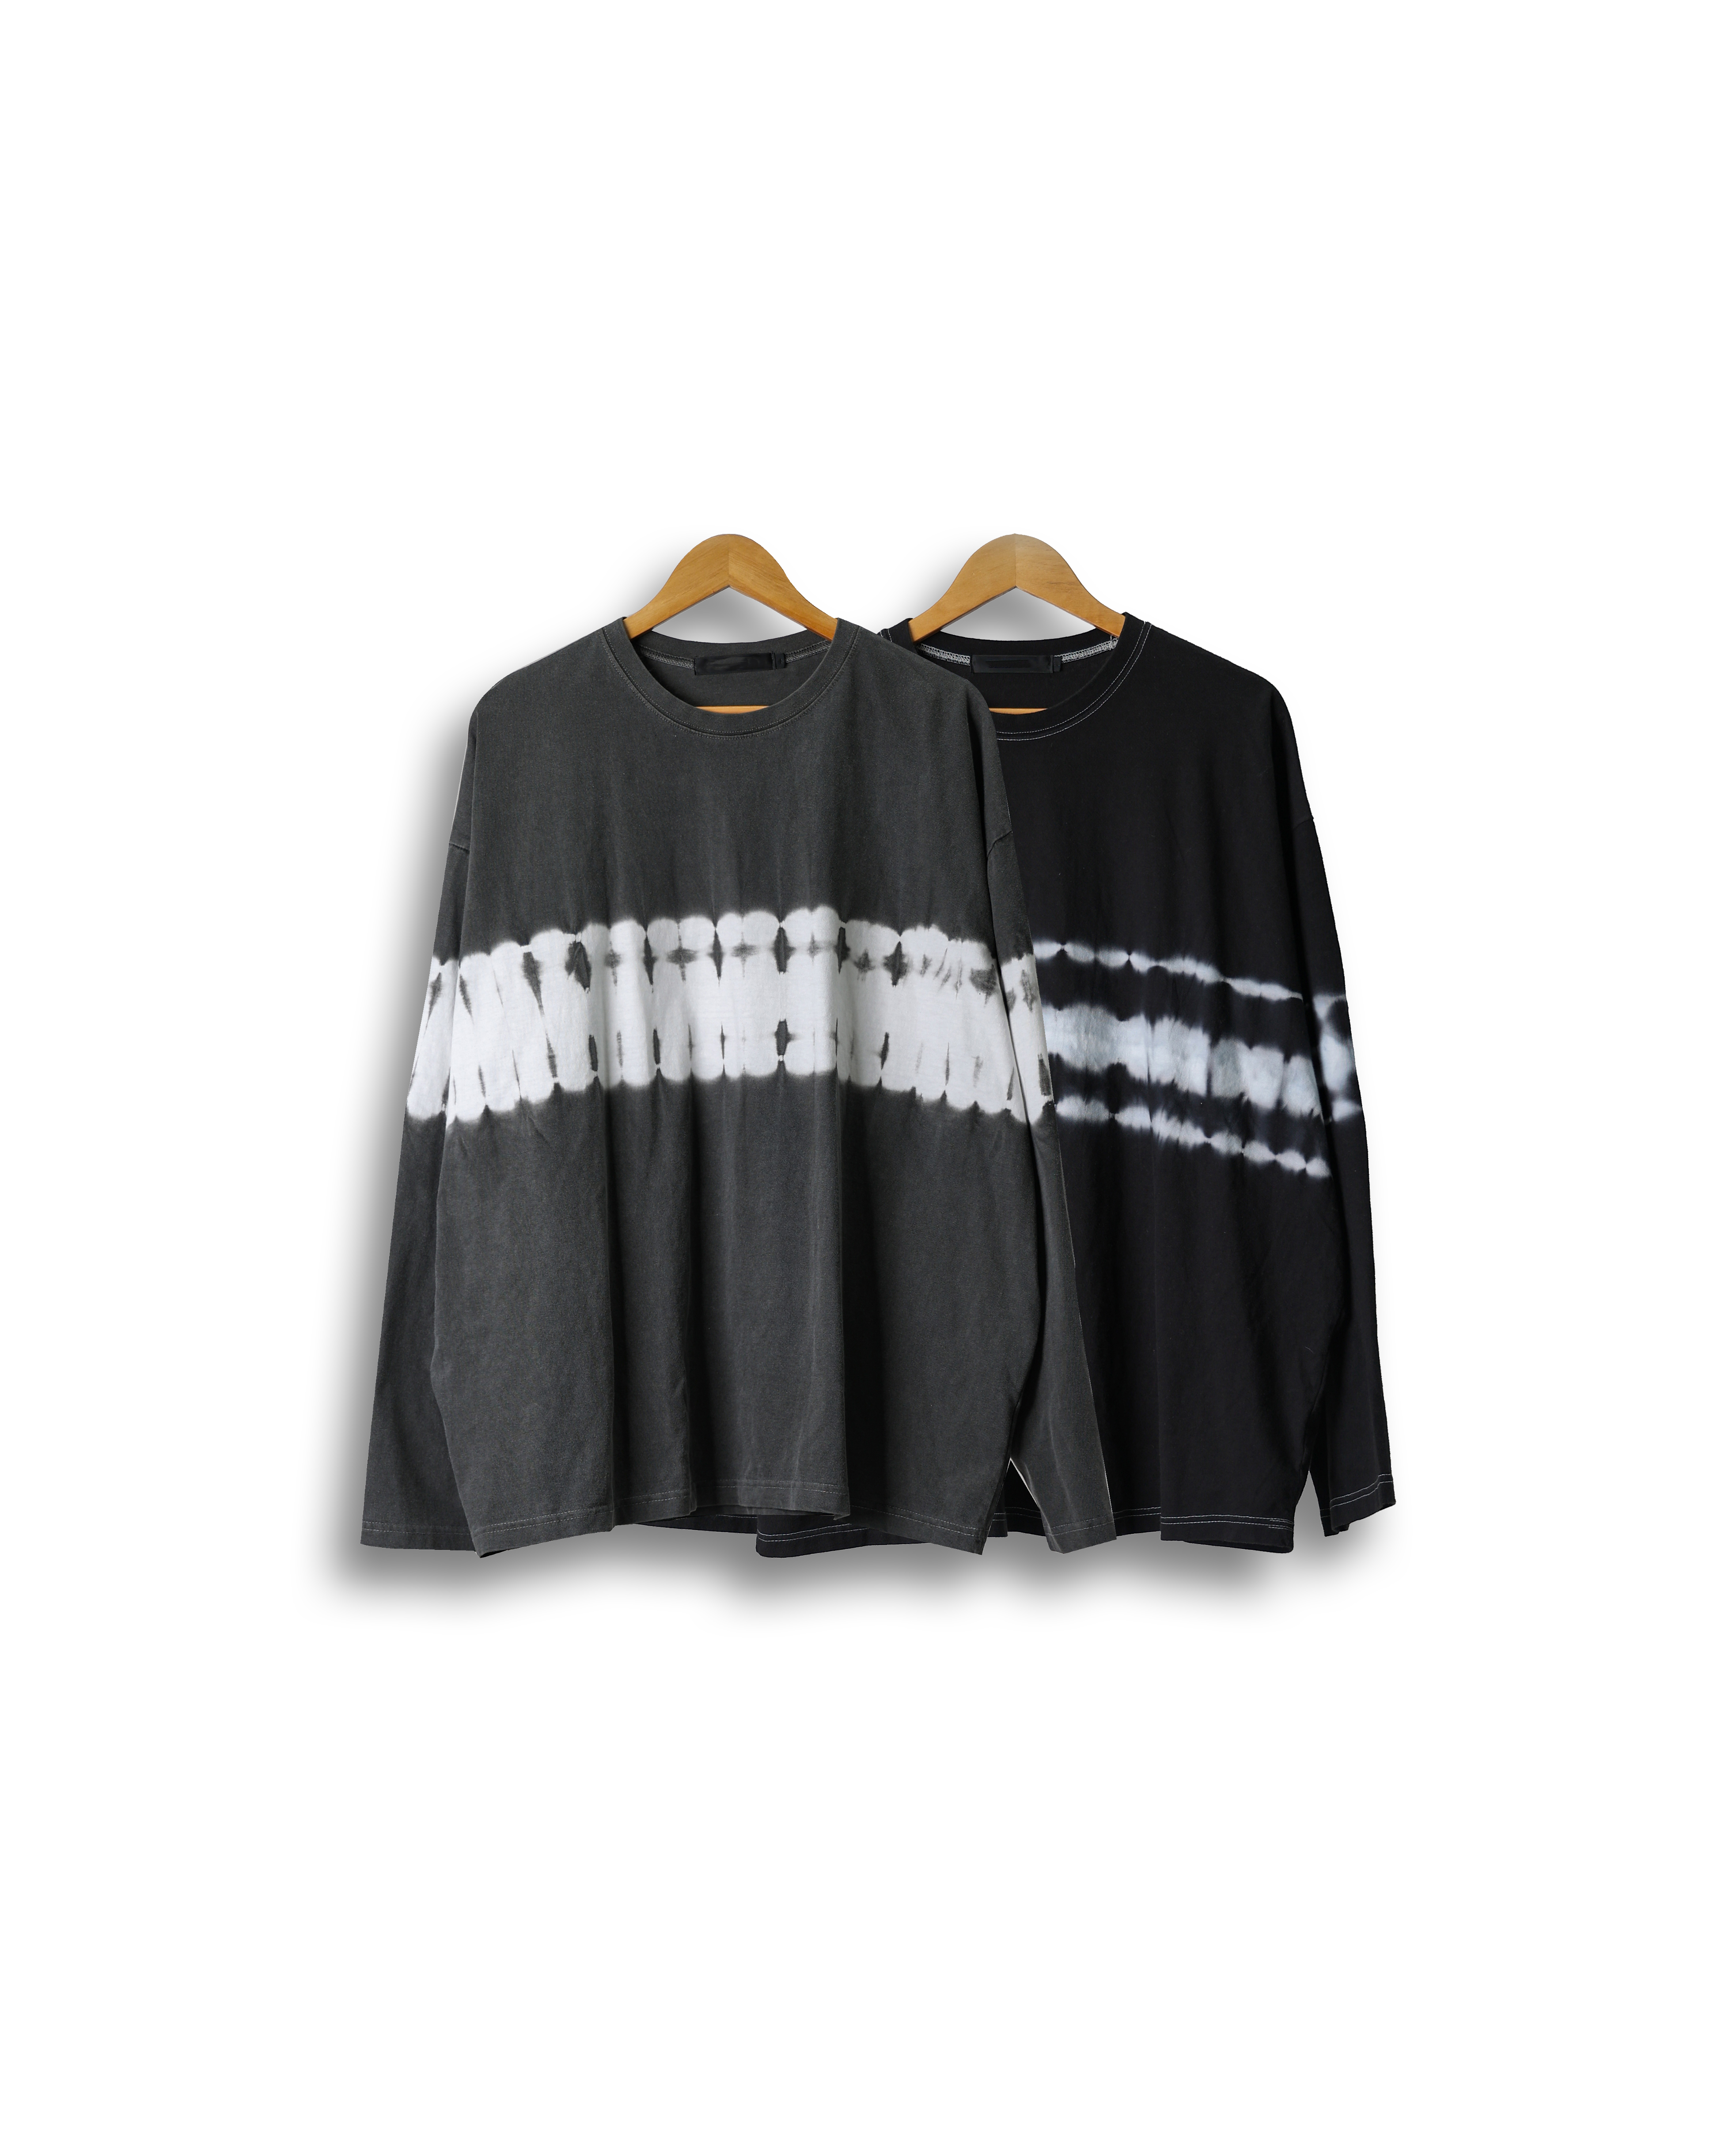 GLMM Middle Dying Over Long Sleeve (Black/Charcoal) - 5차 리오더 (9/26 배송예정)